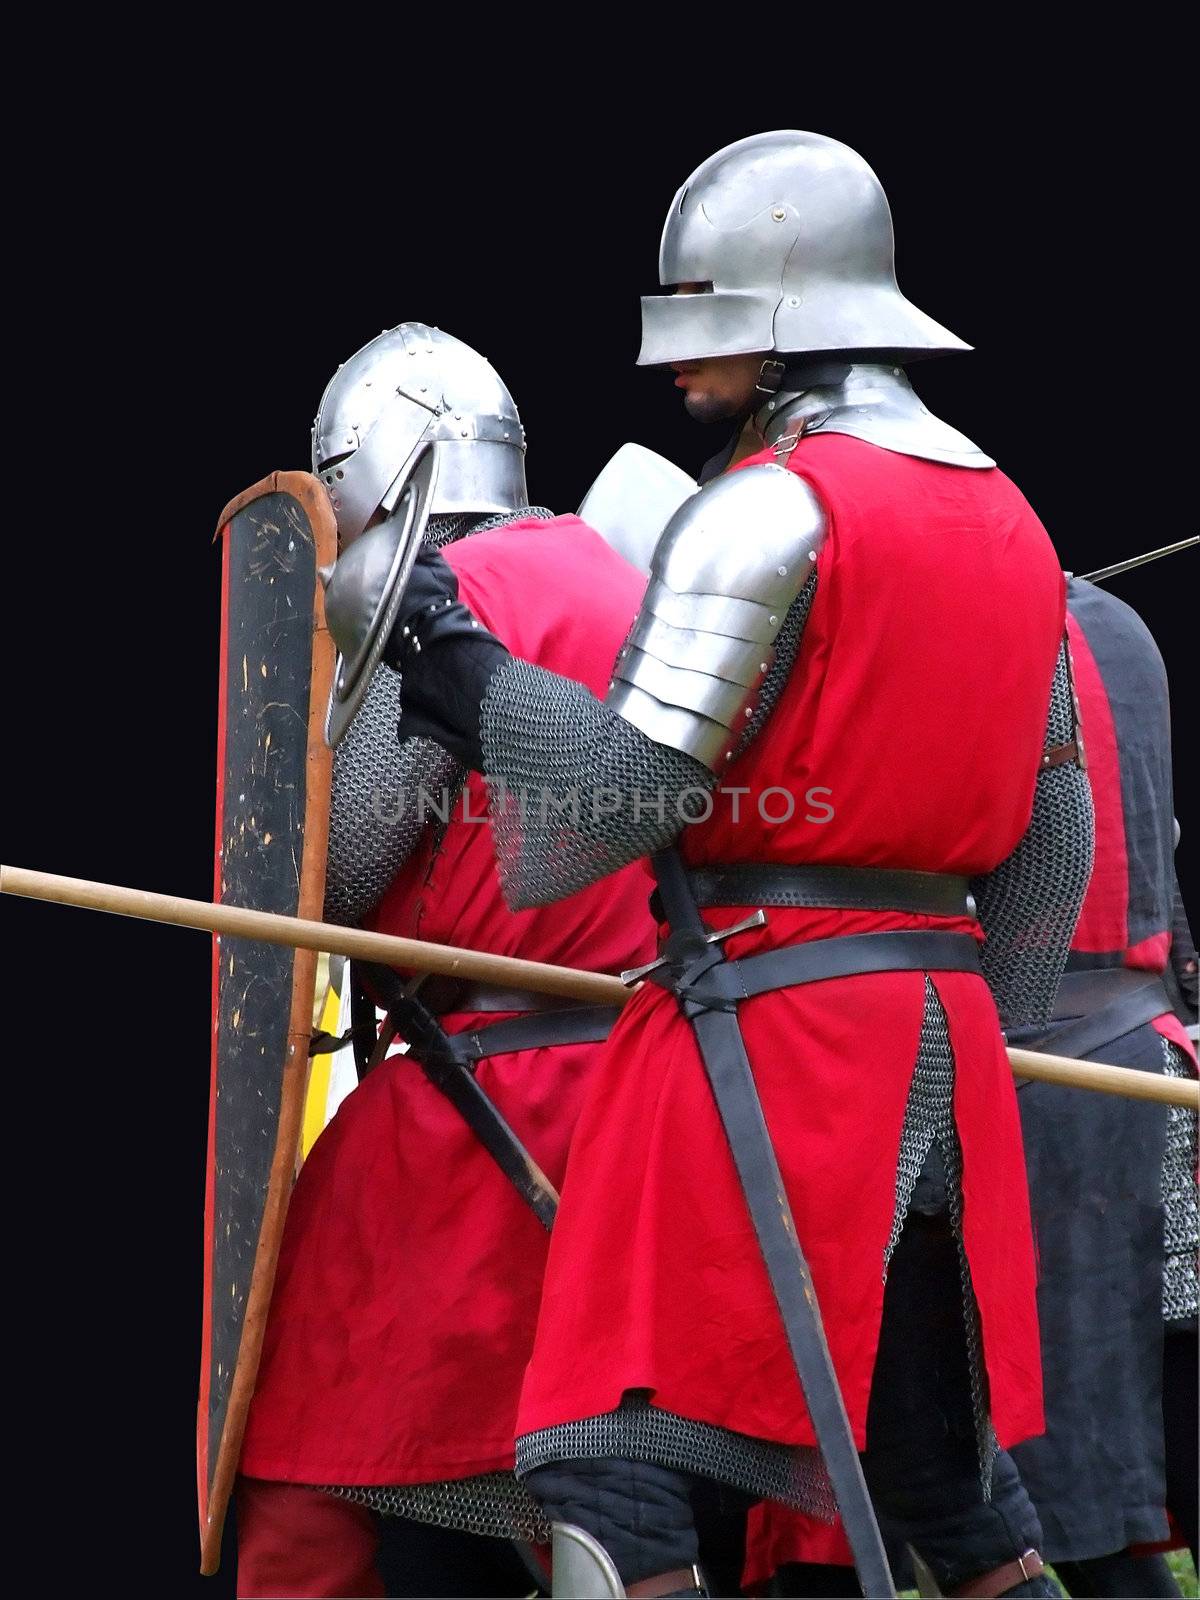 Group of medieval soldiers in a festival at Santa Maria da Feira, Portugal